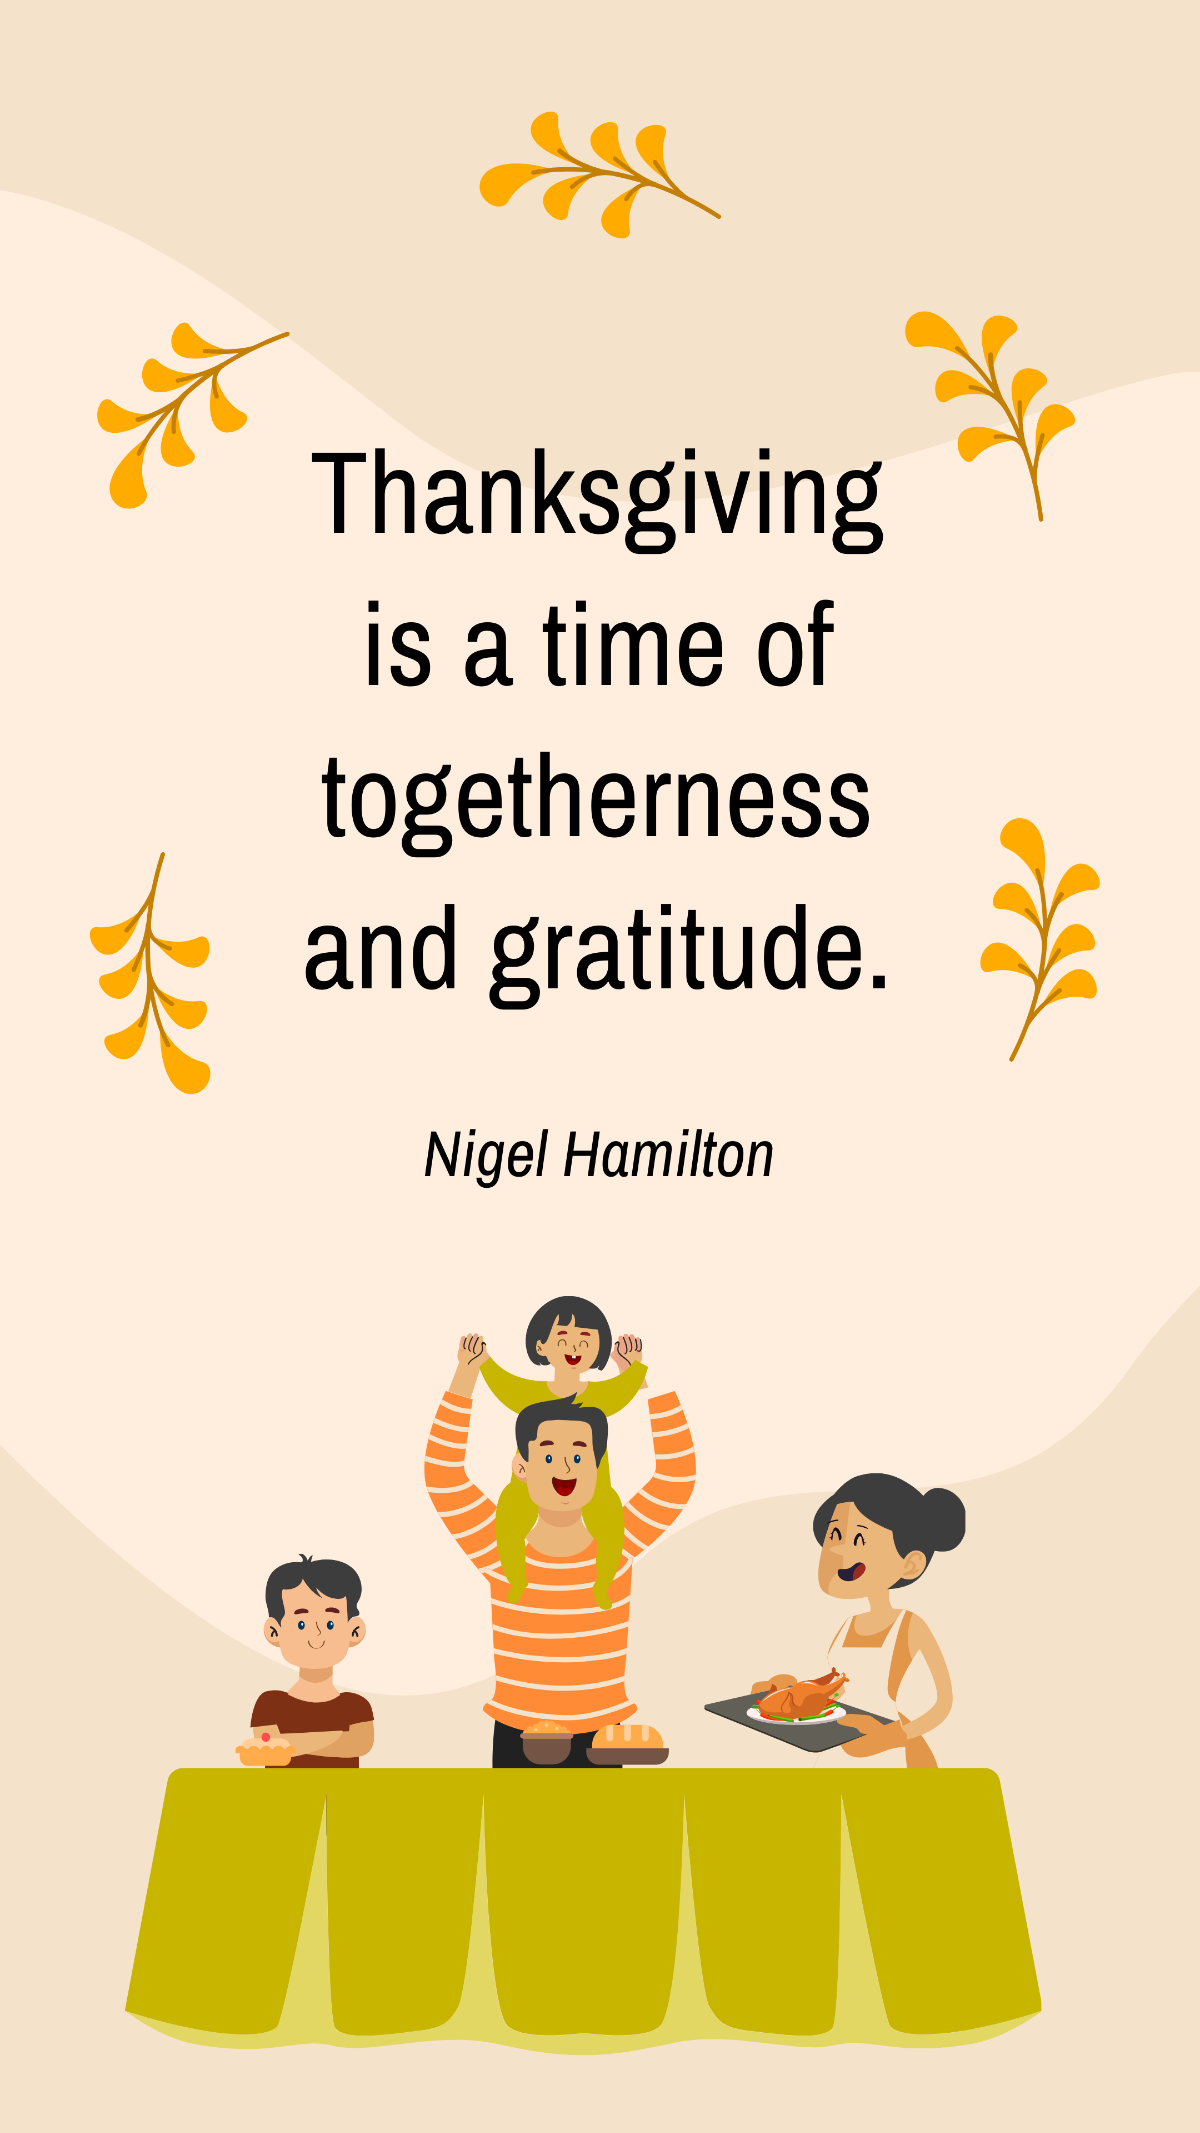 Nigel Hamilton - Thanksgiving is a time of togetherness and gratitude. Template